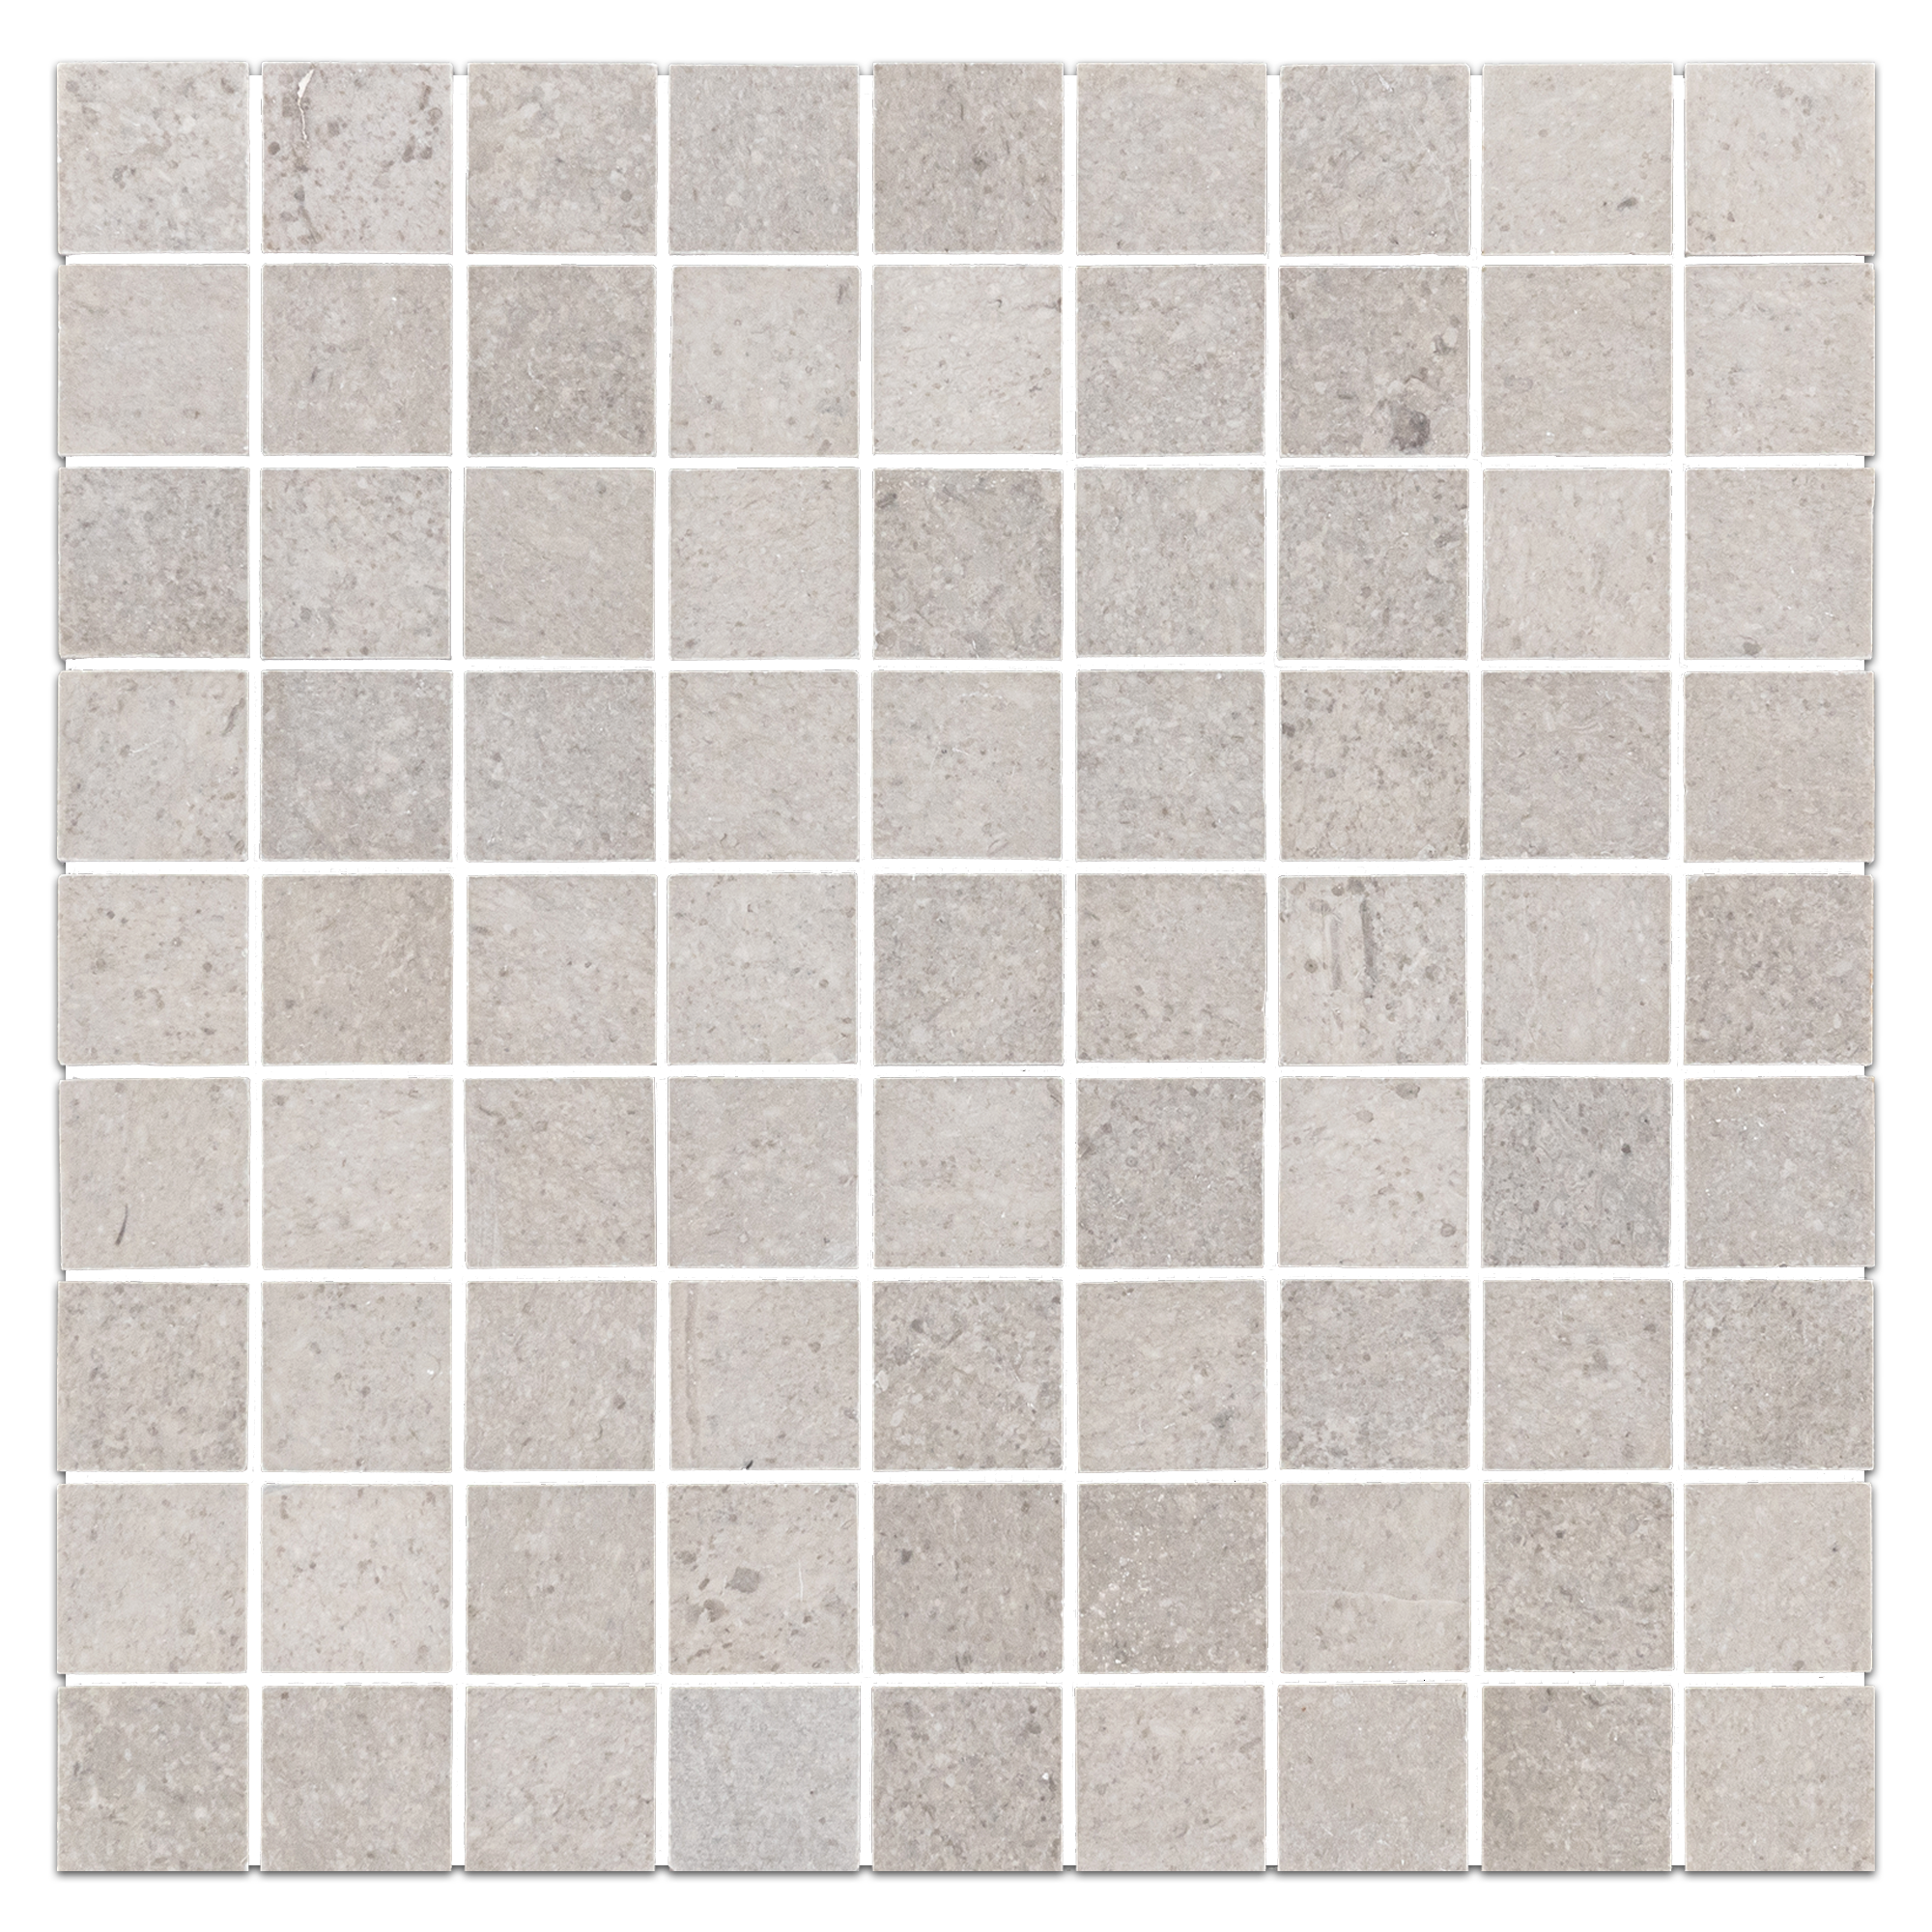 Elon Sand Dollar Marble 1.25x1.25 Straight Stack Field Mosaic 12x12x0.375 Honed Tile - Surface Group Online Store